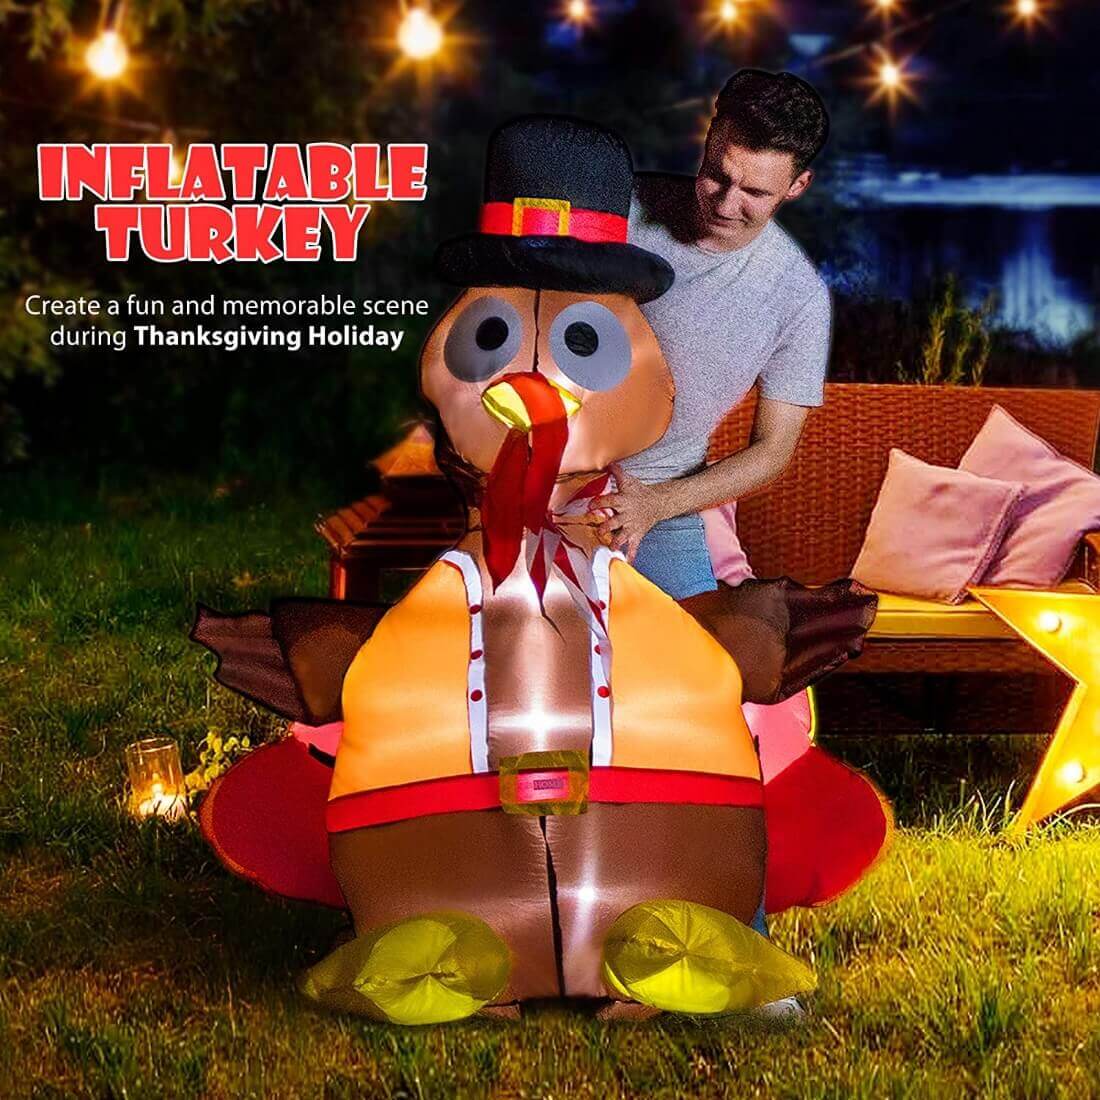  VIVOHOME 5ft Height Thanksgiving Inflatable LED Lighted Turkey with Hat Blow up Outdoor Lawn Yard Decoration